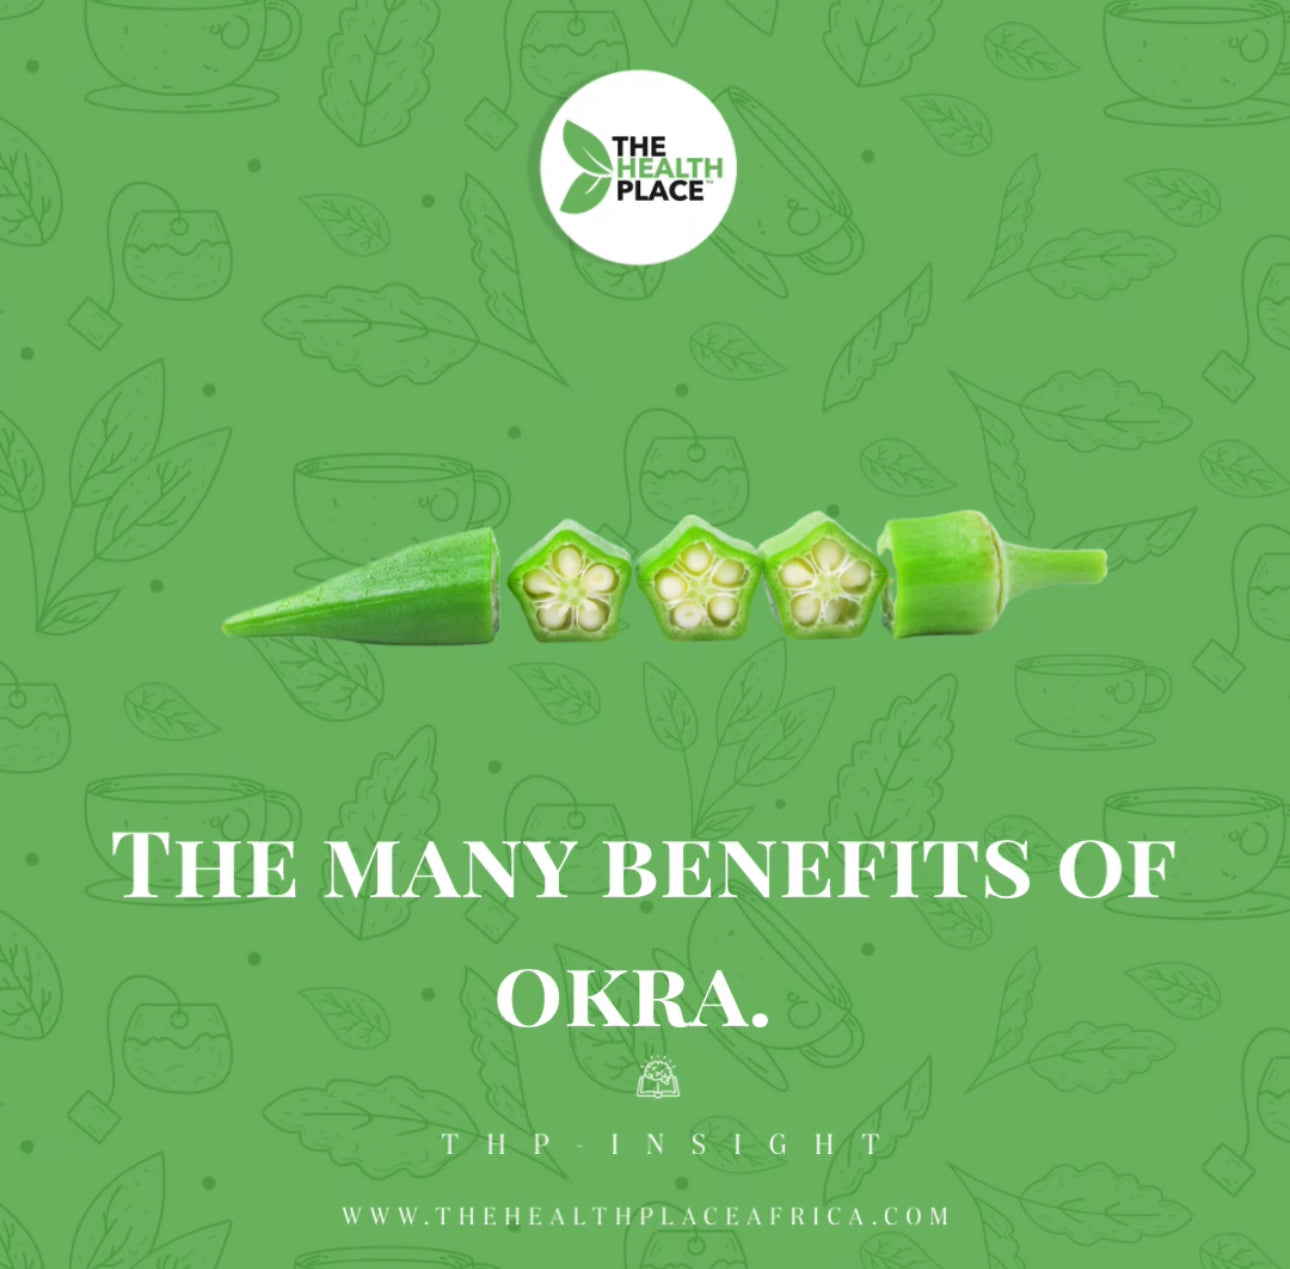 THE MANY BENEFITS OF OKRA